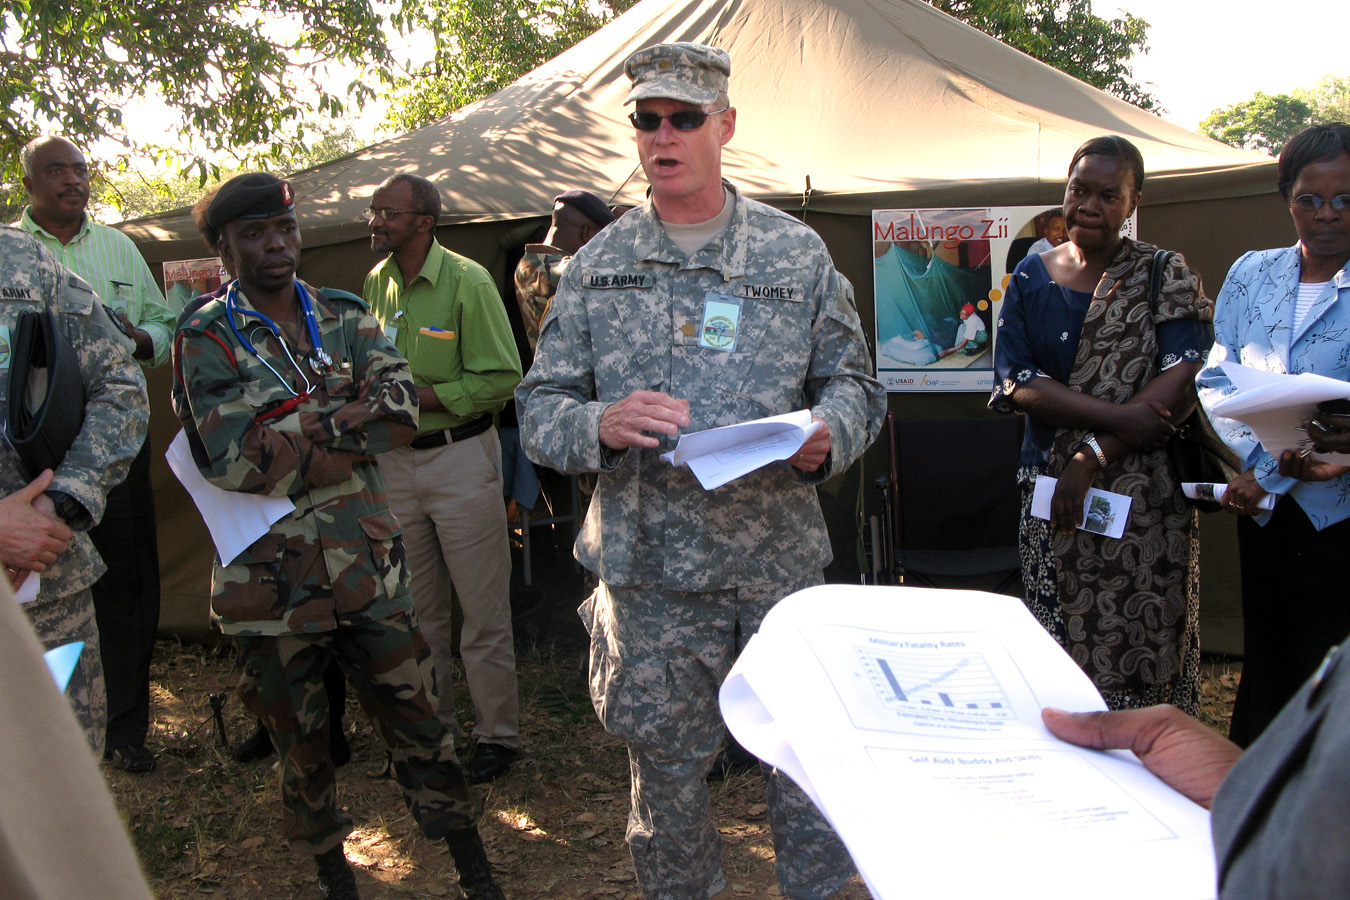 MEDREACH 11, Soldiers share CLS, Malawi, May 2011